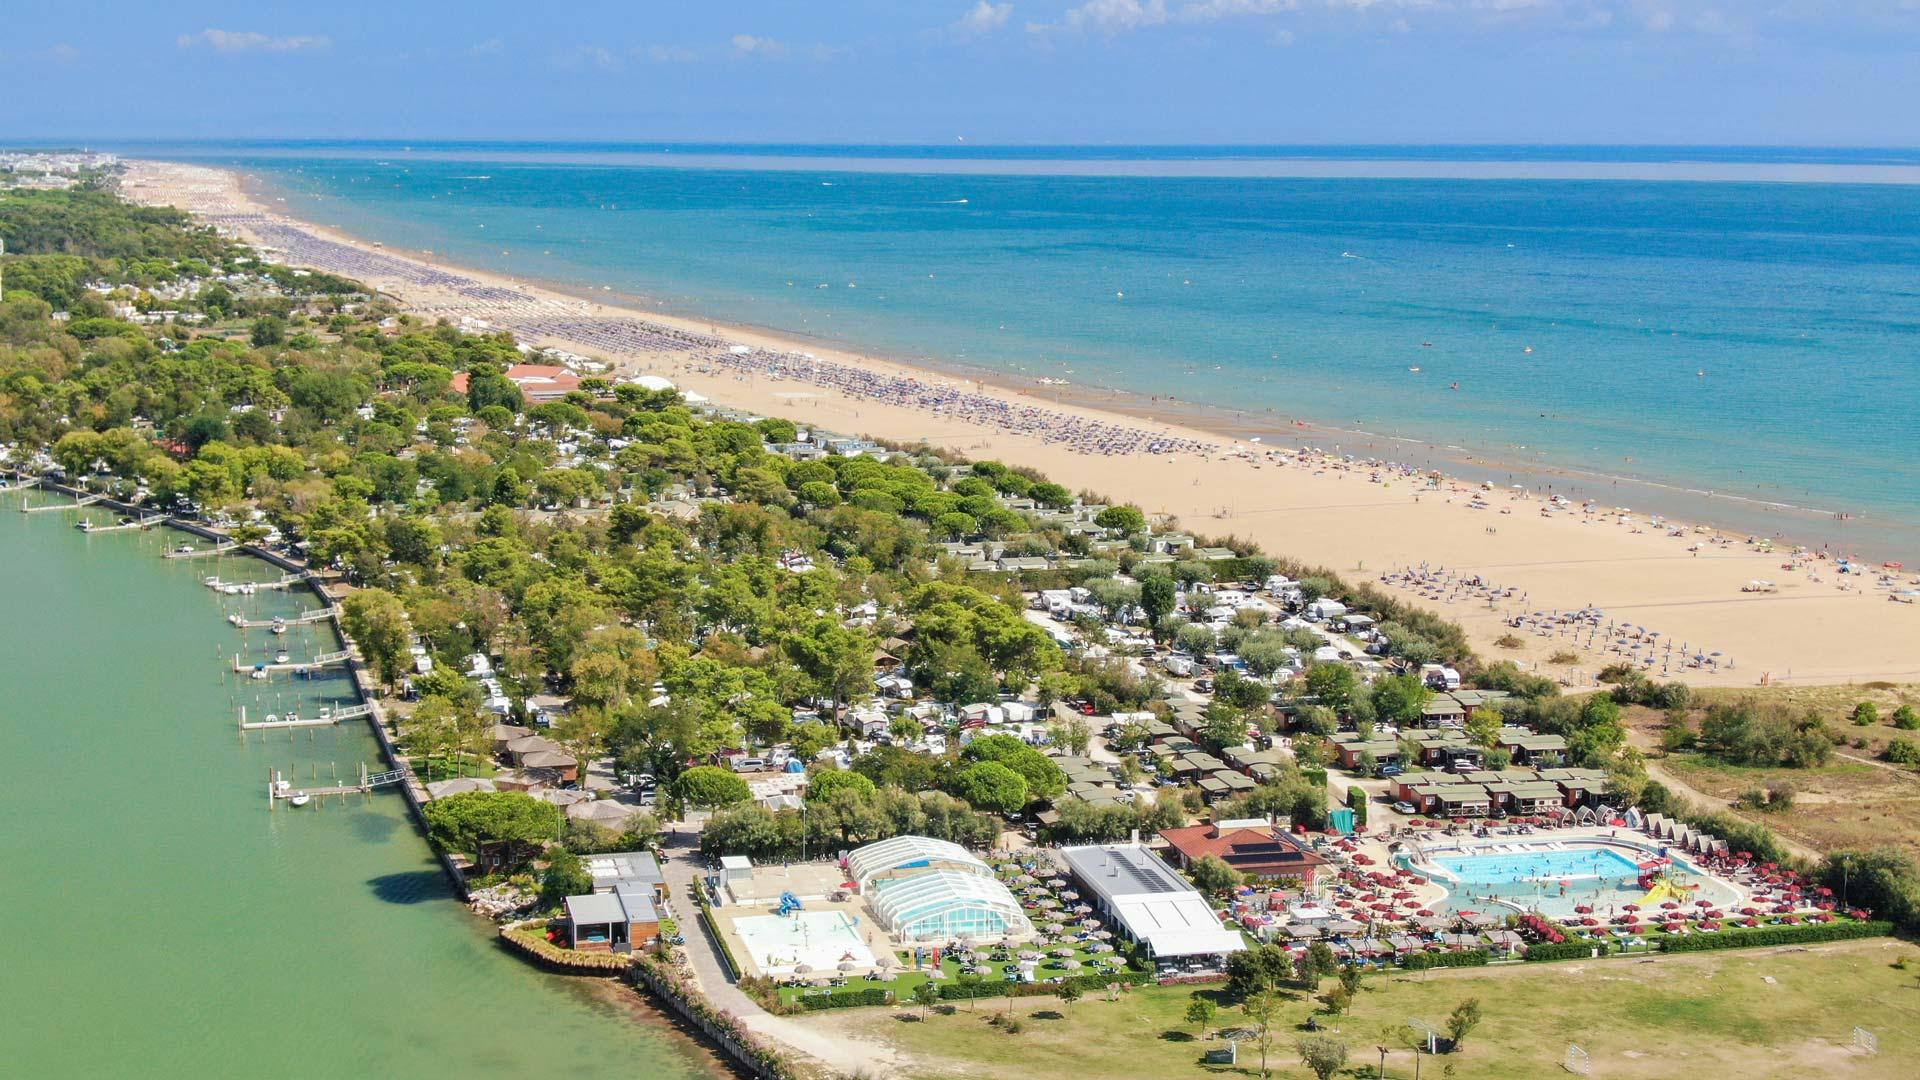 capalonga en end-of-school-holidays-june-offer-on-camping-pitches-in-bibione 014